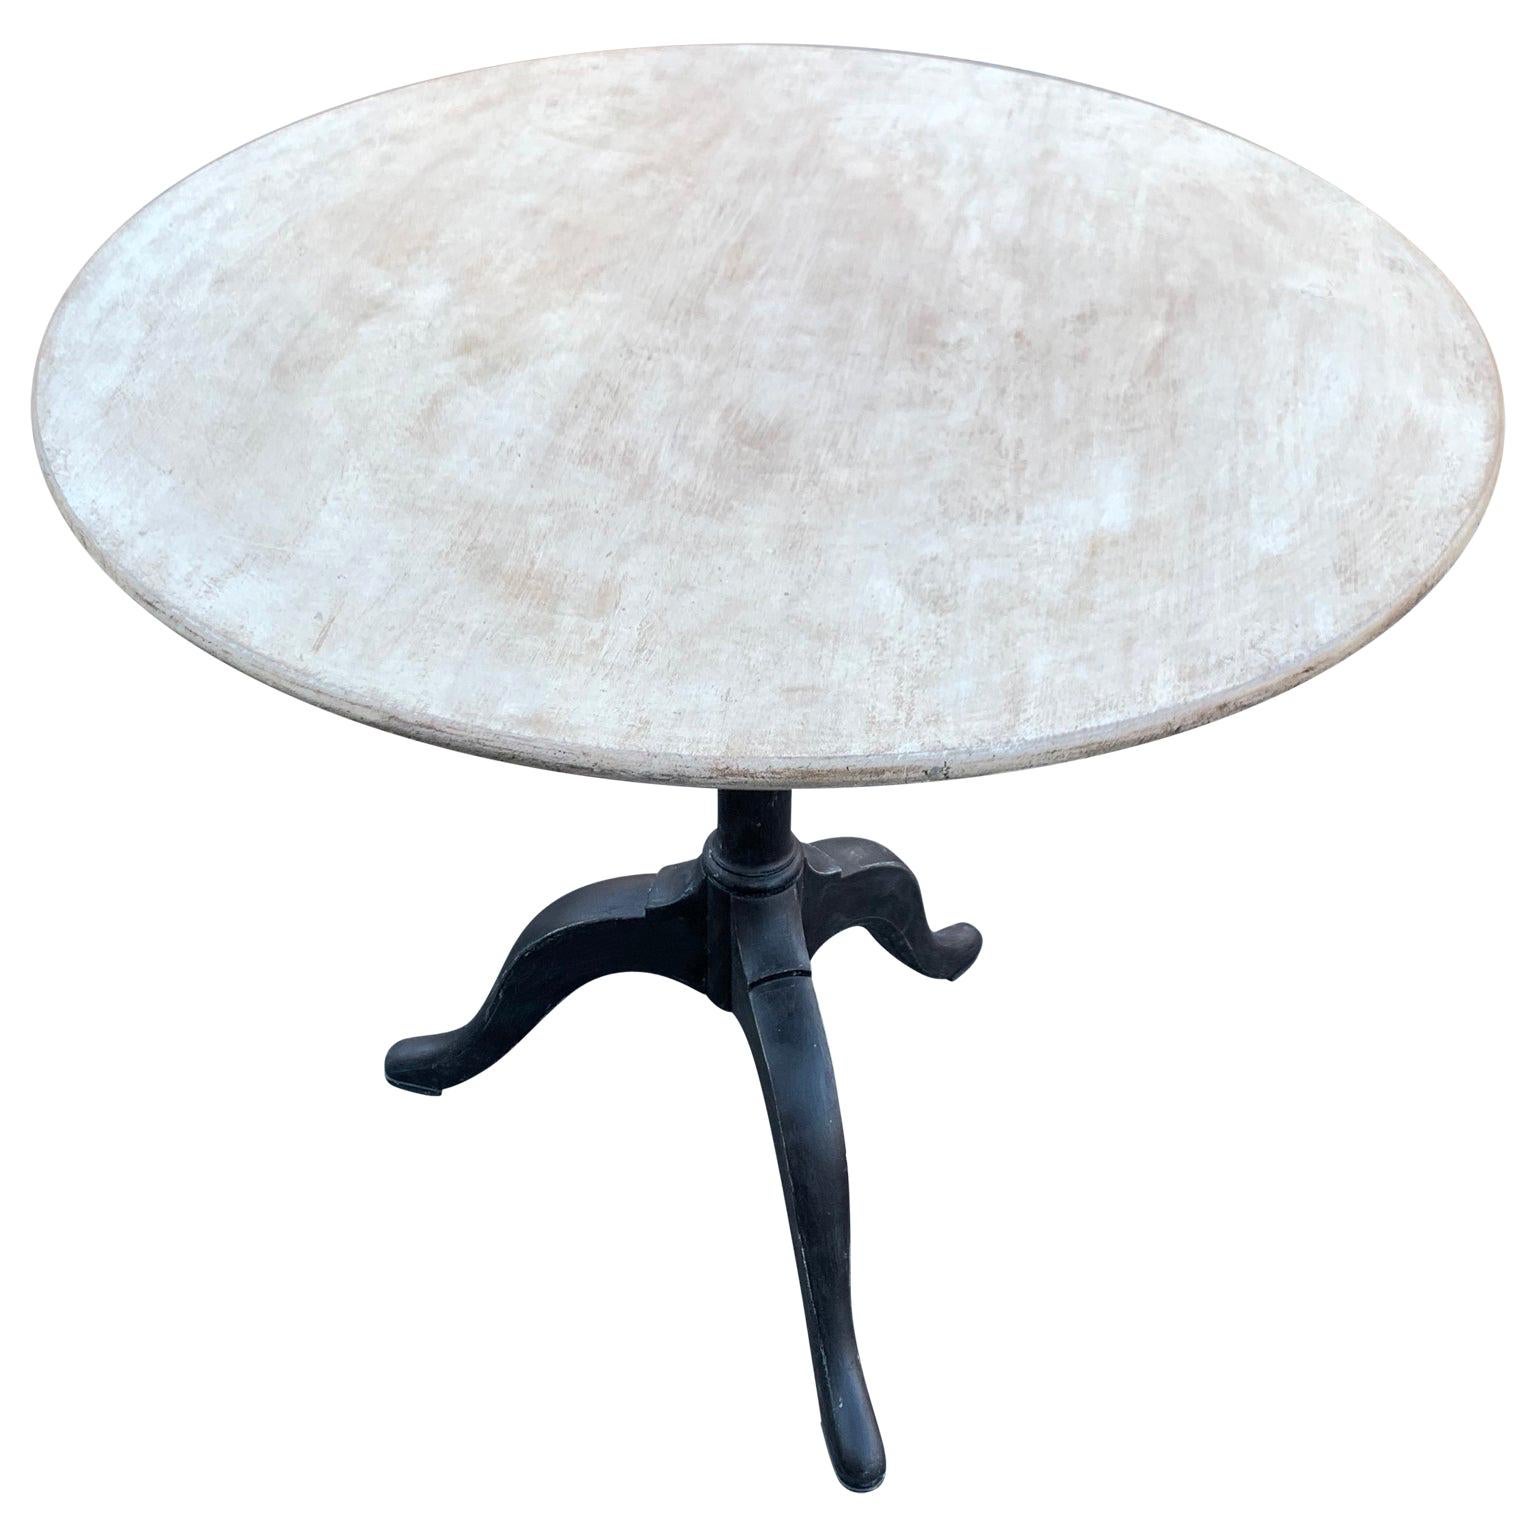 Round Gray Painted Gustavian Tilt-Top Table, Circa 1830s